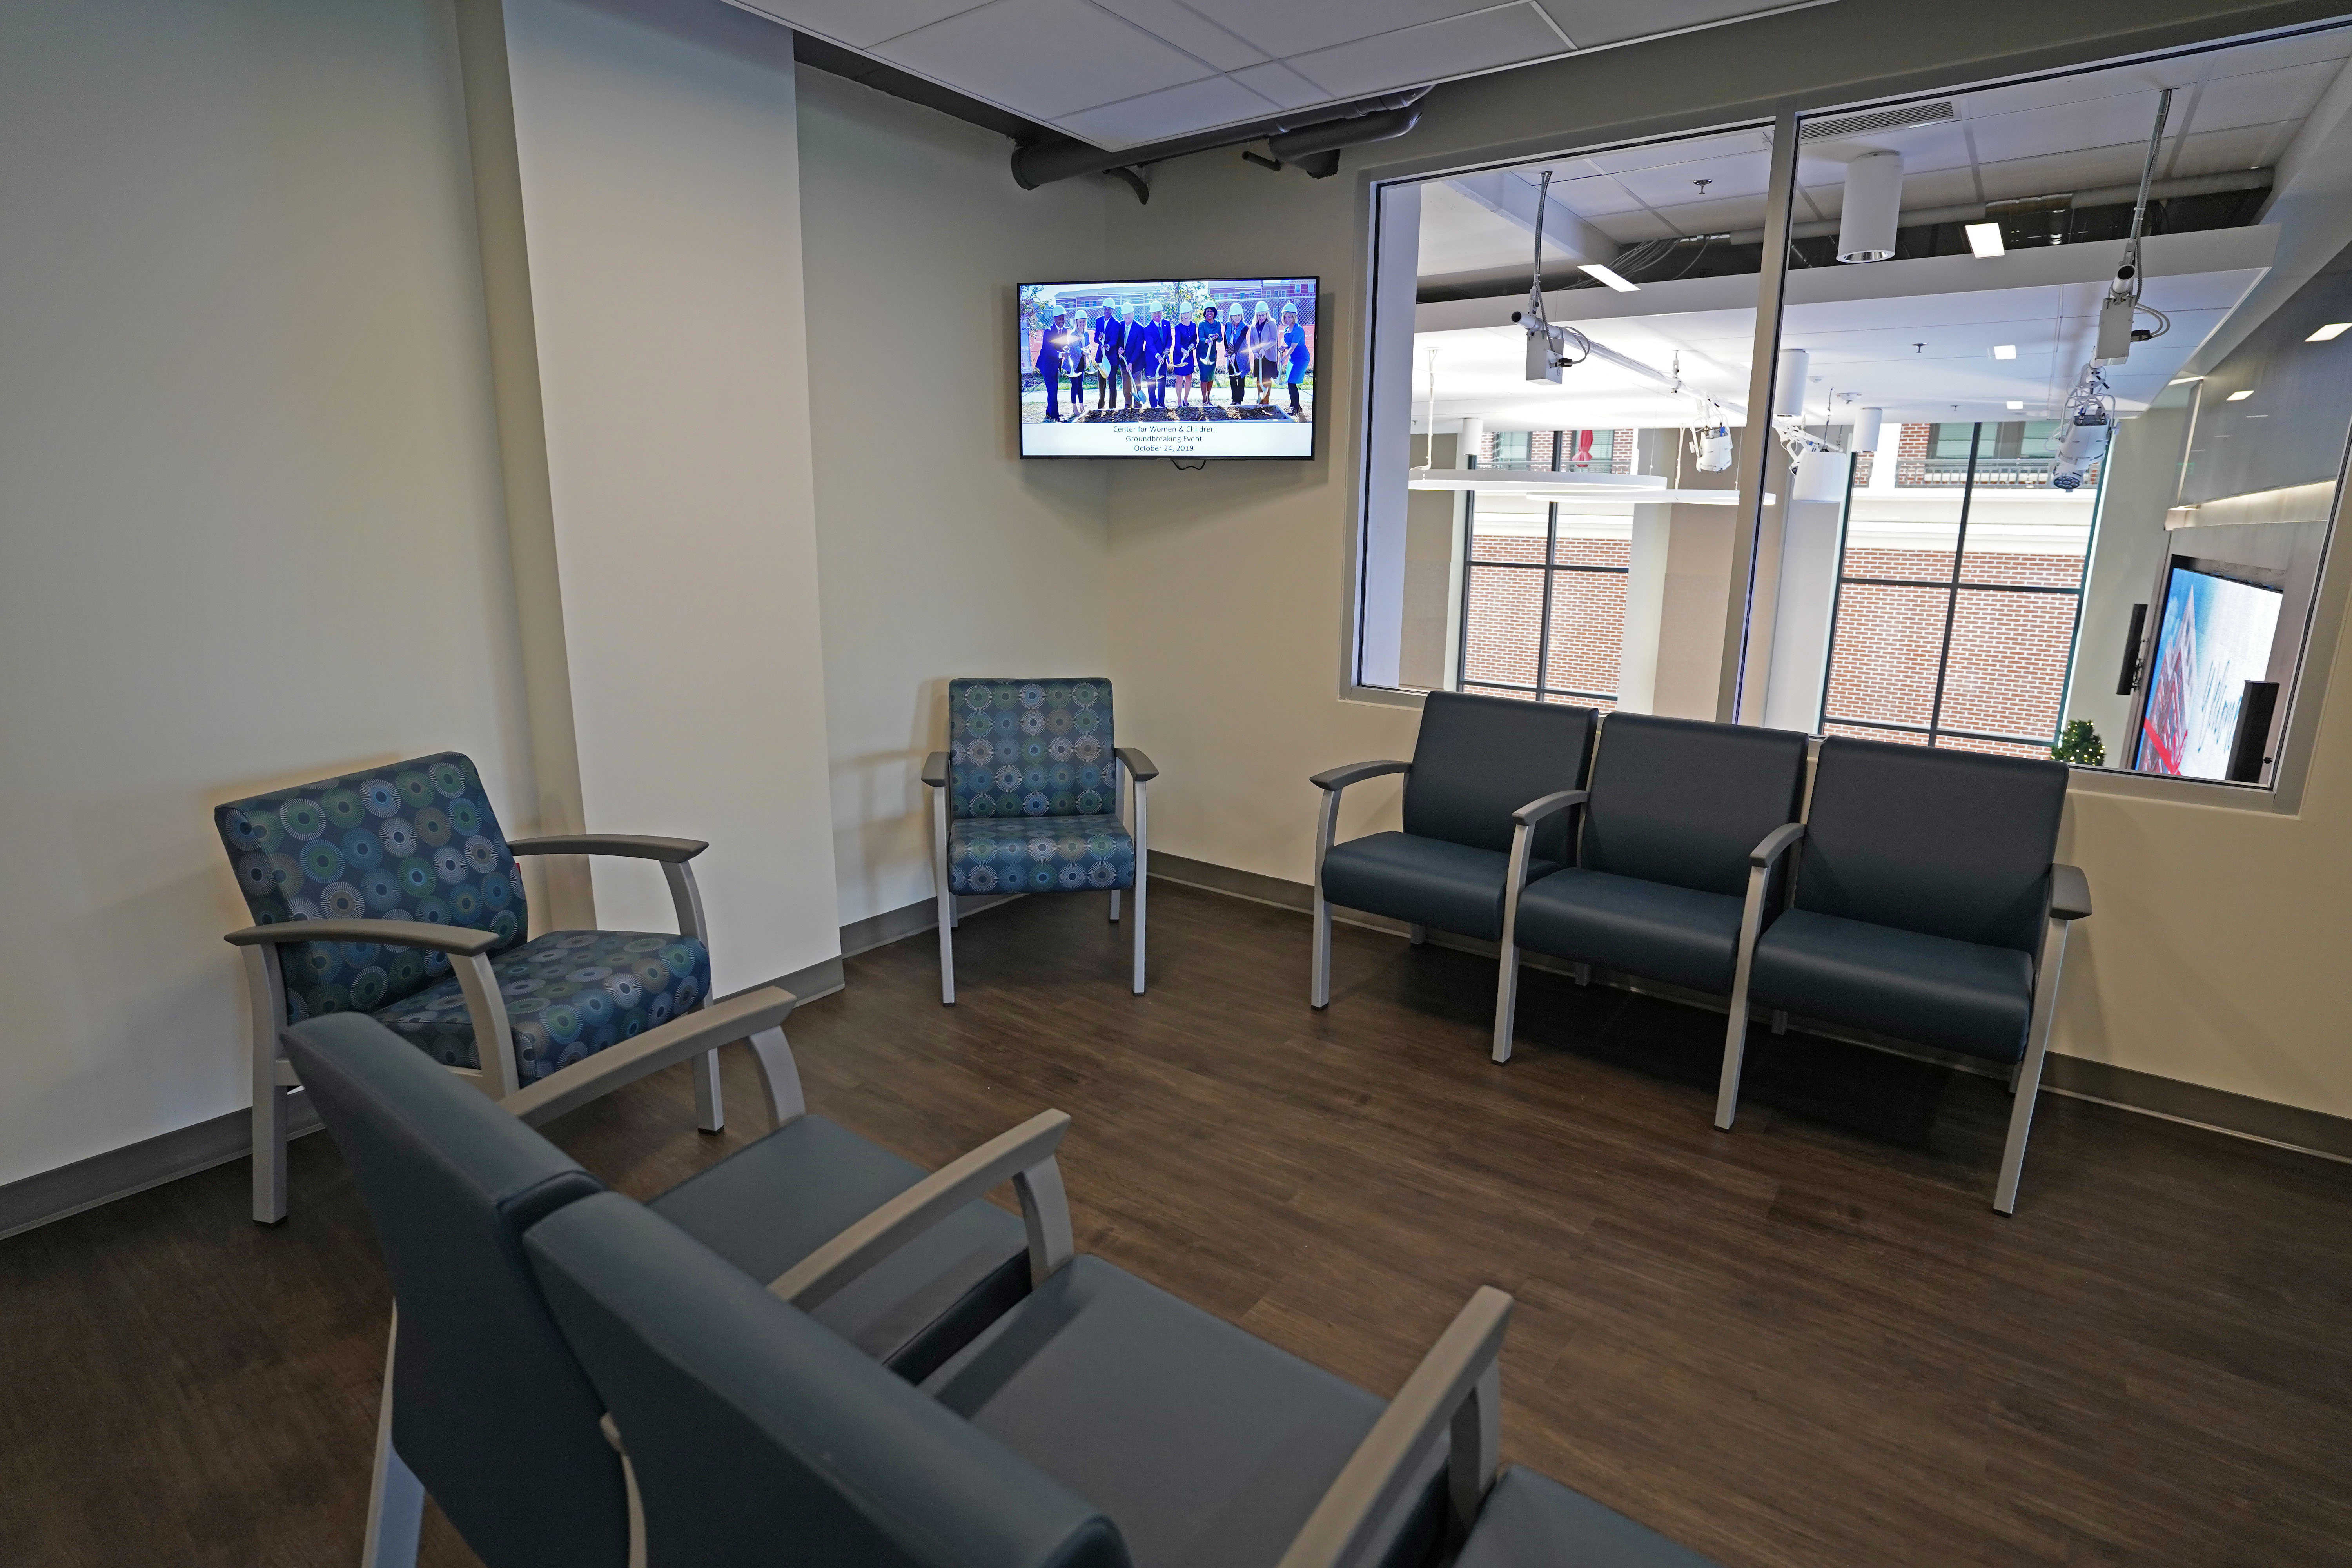 Waiting room digital signage at Helping Up Mission by Vision Technologies